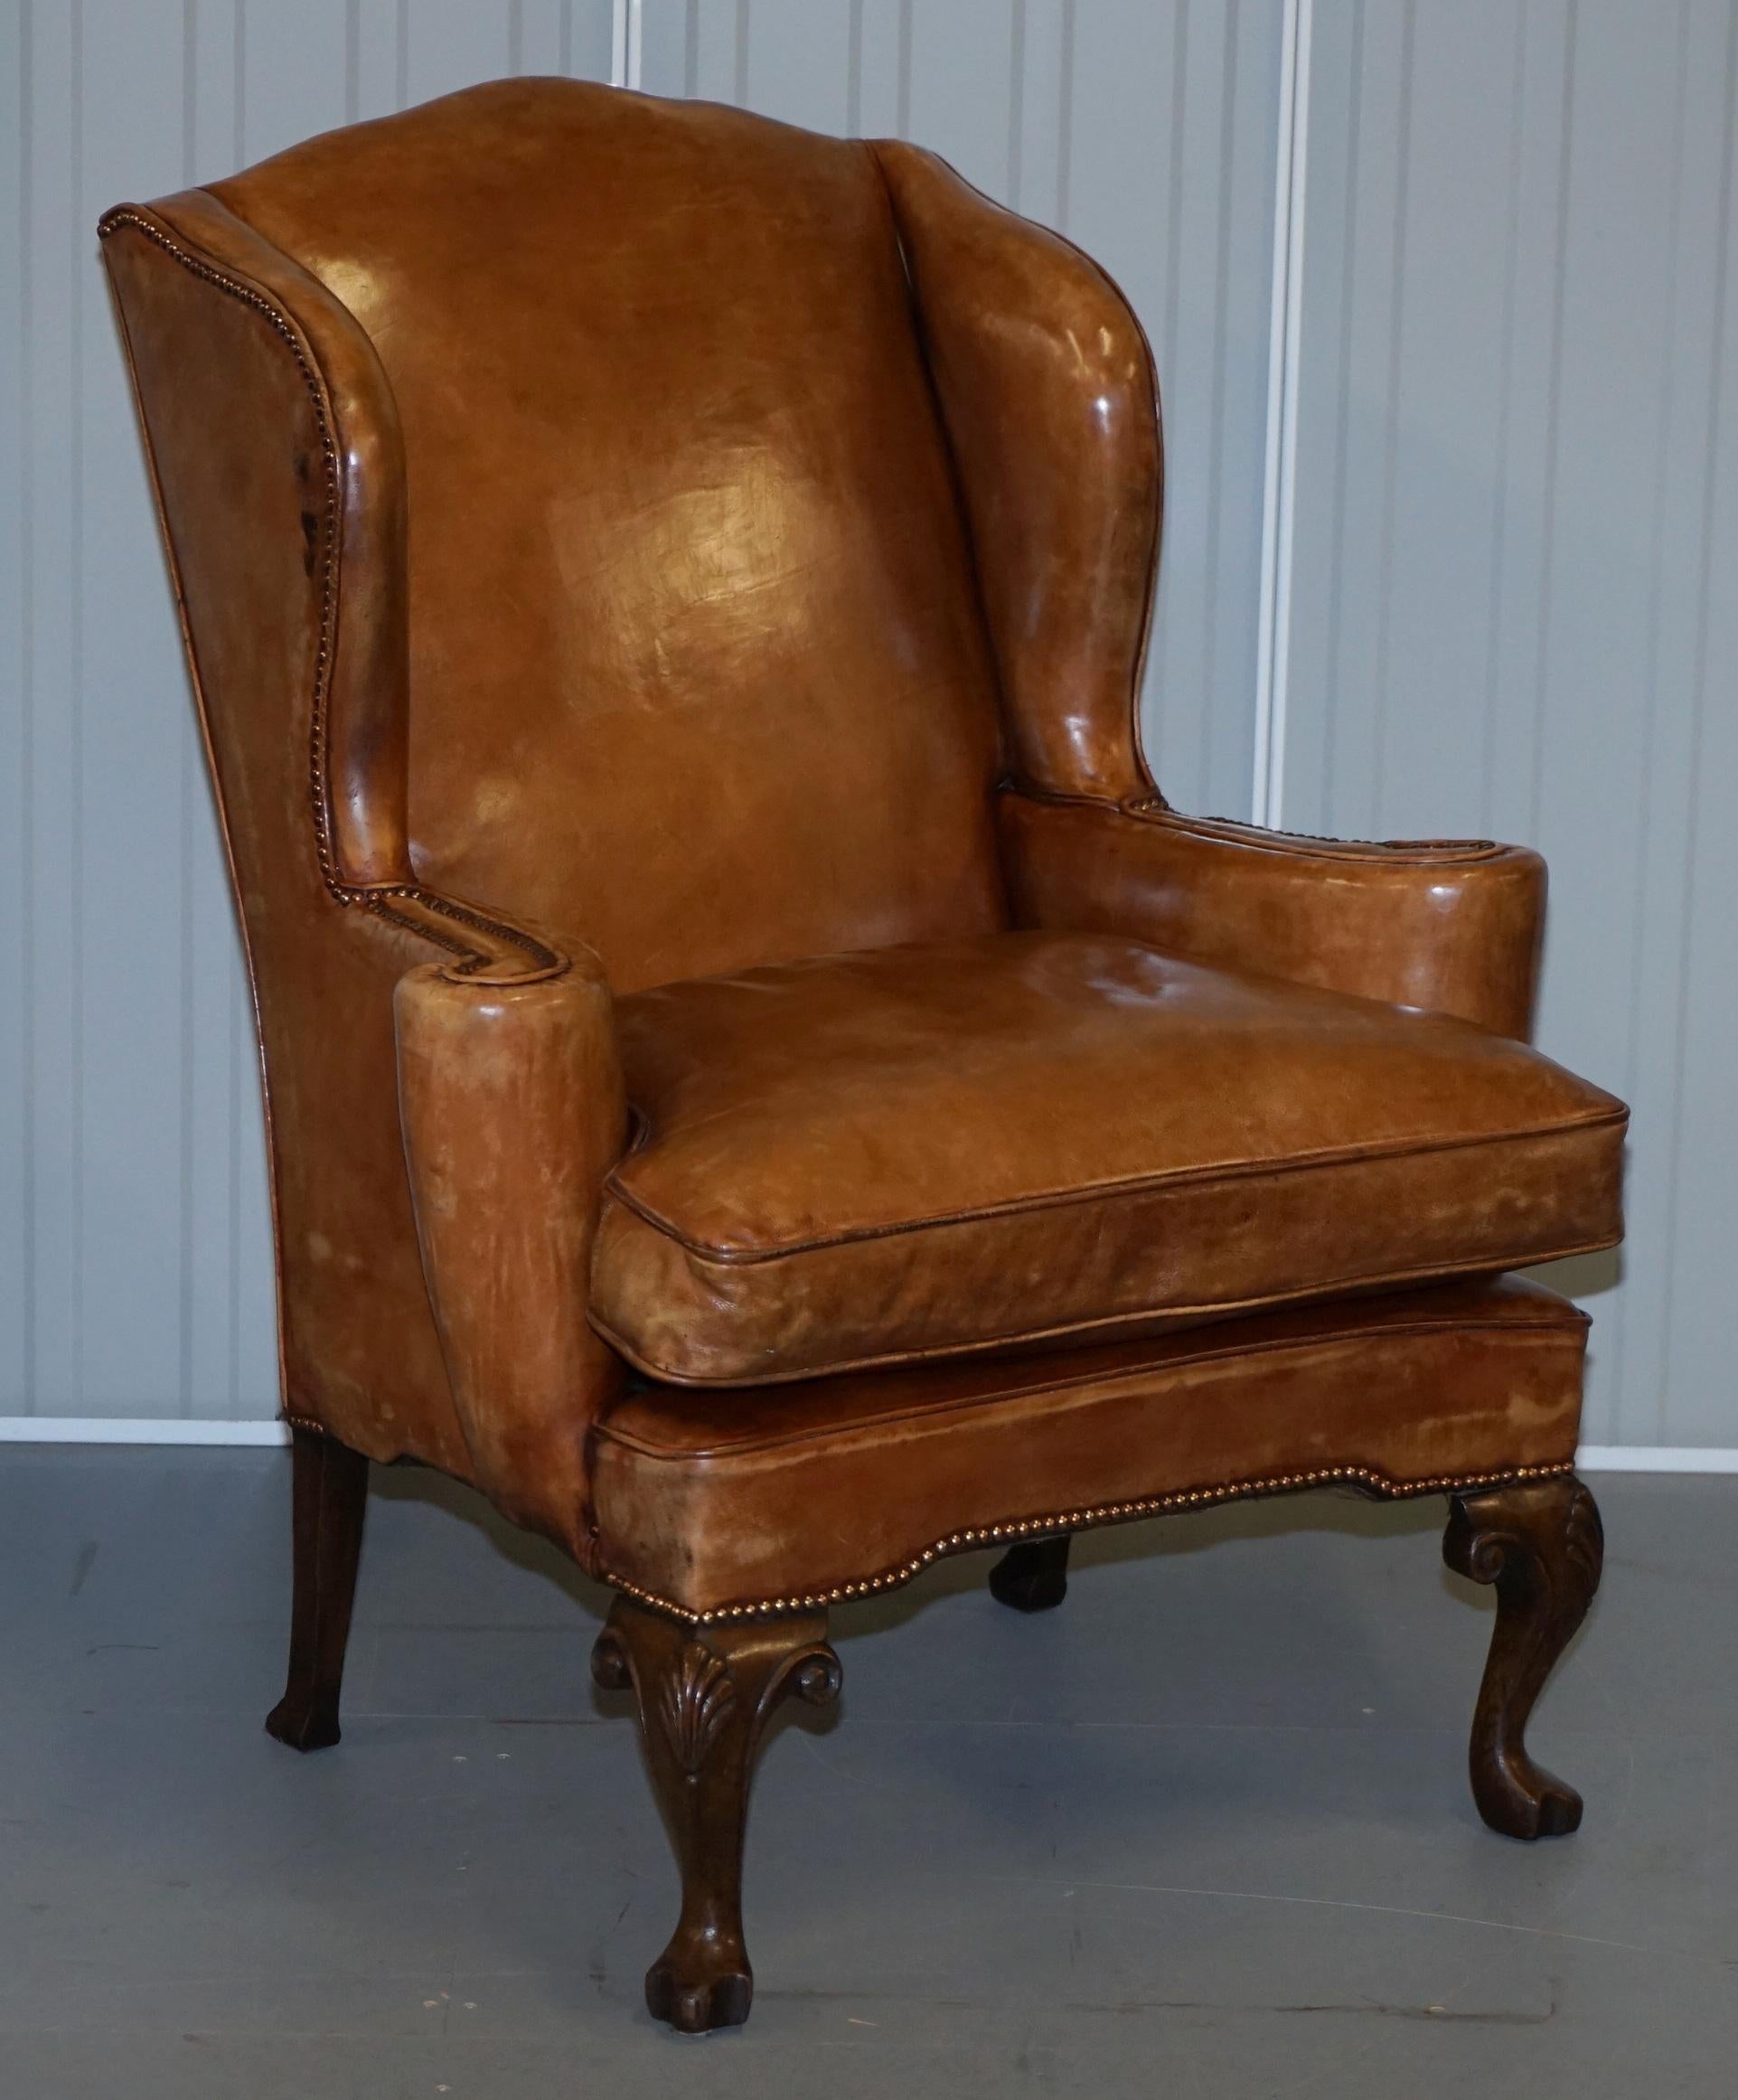 We are delighted to offer for sale this very rare and important pair of original Georgian Irish brown leather armchairs with William Morris style flat top arms

A good looking and well made set, they are upholstered with fully aniline leather, it